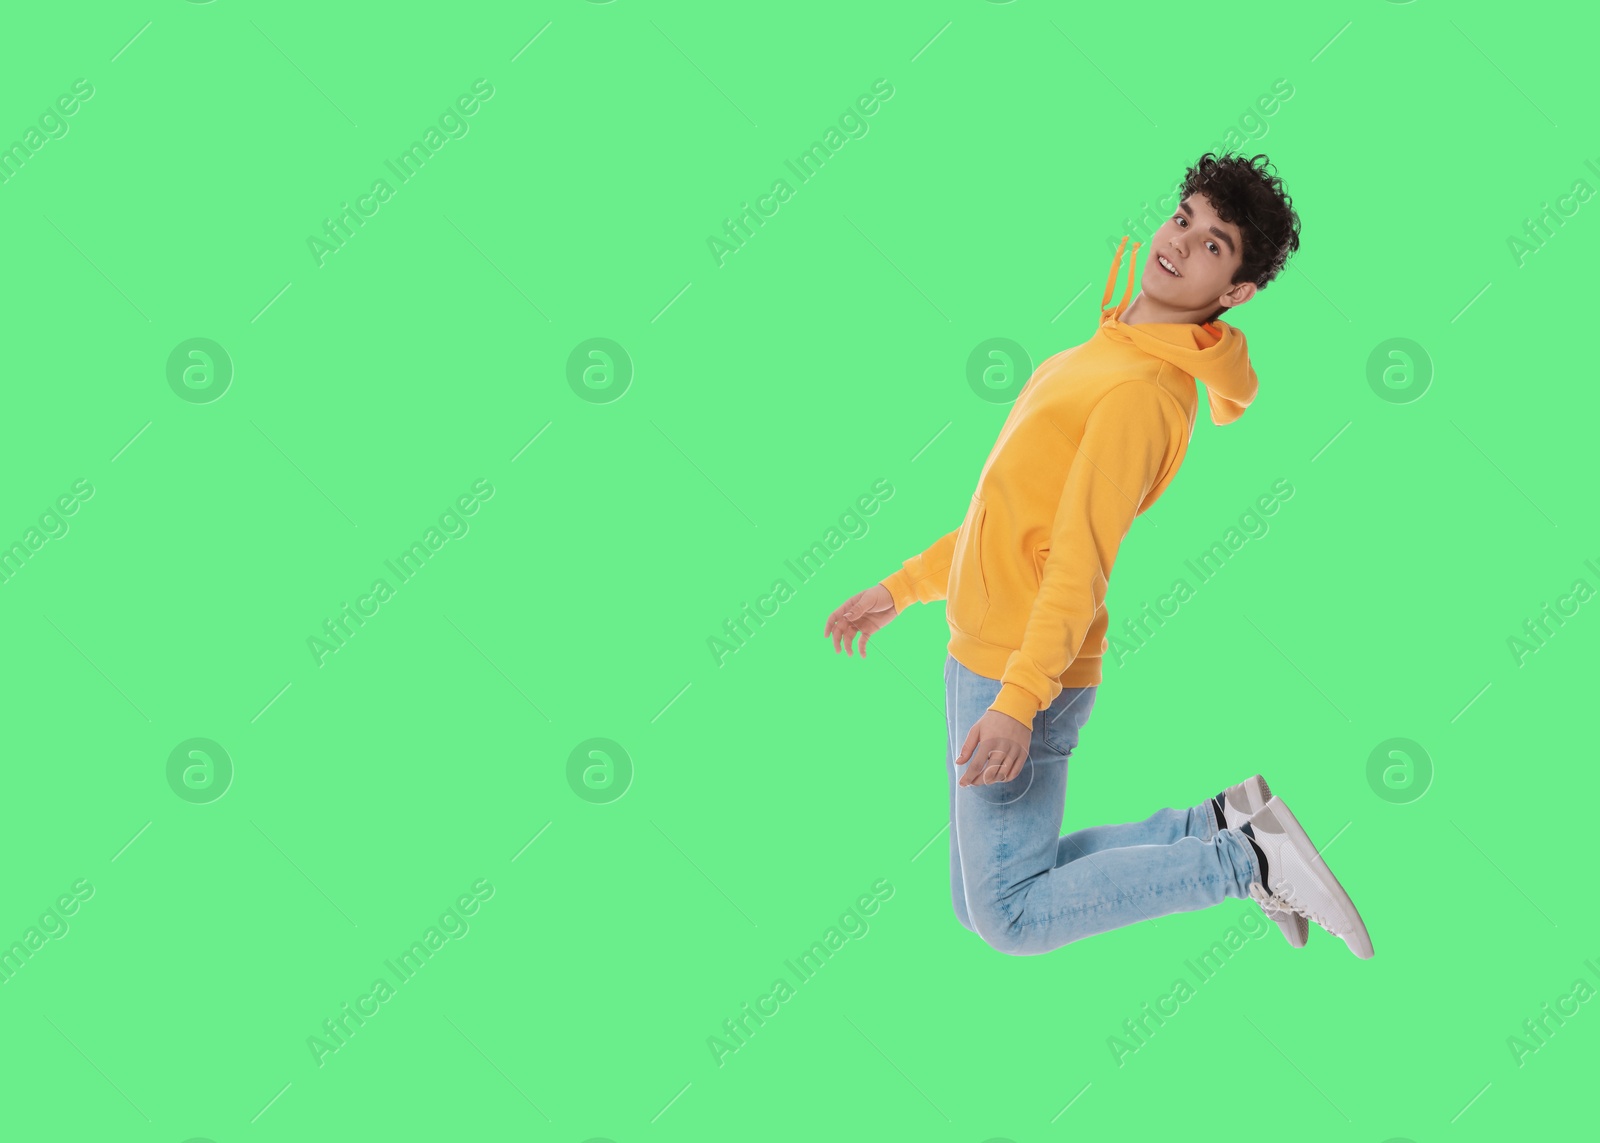 Image of Teenage boy jumping on green background, space for text